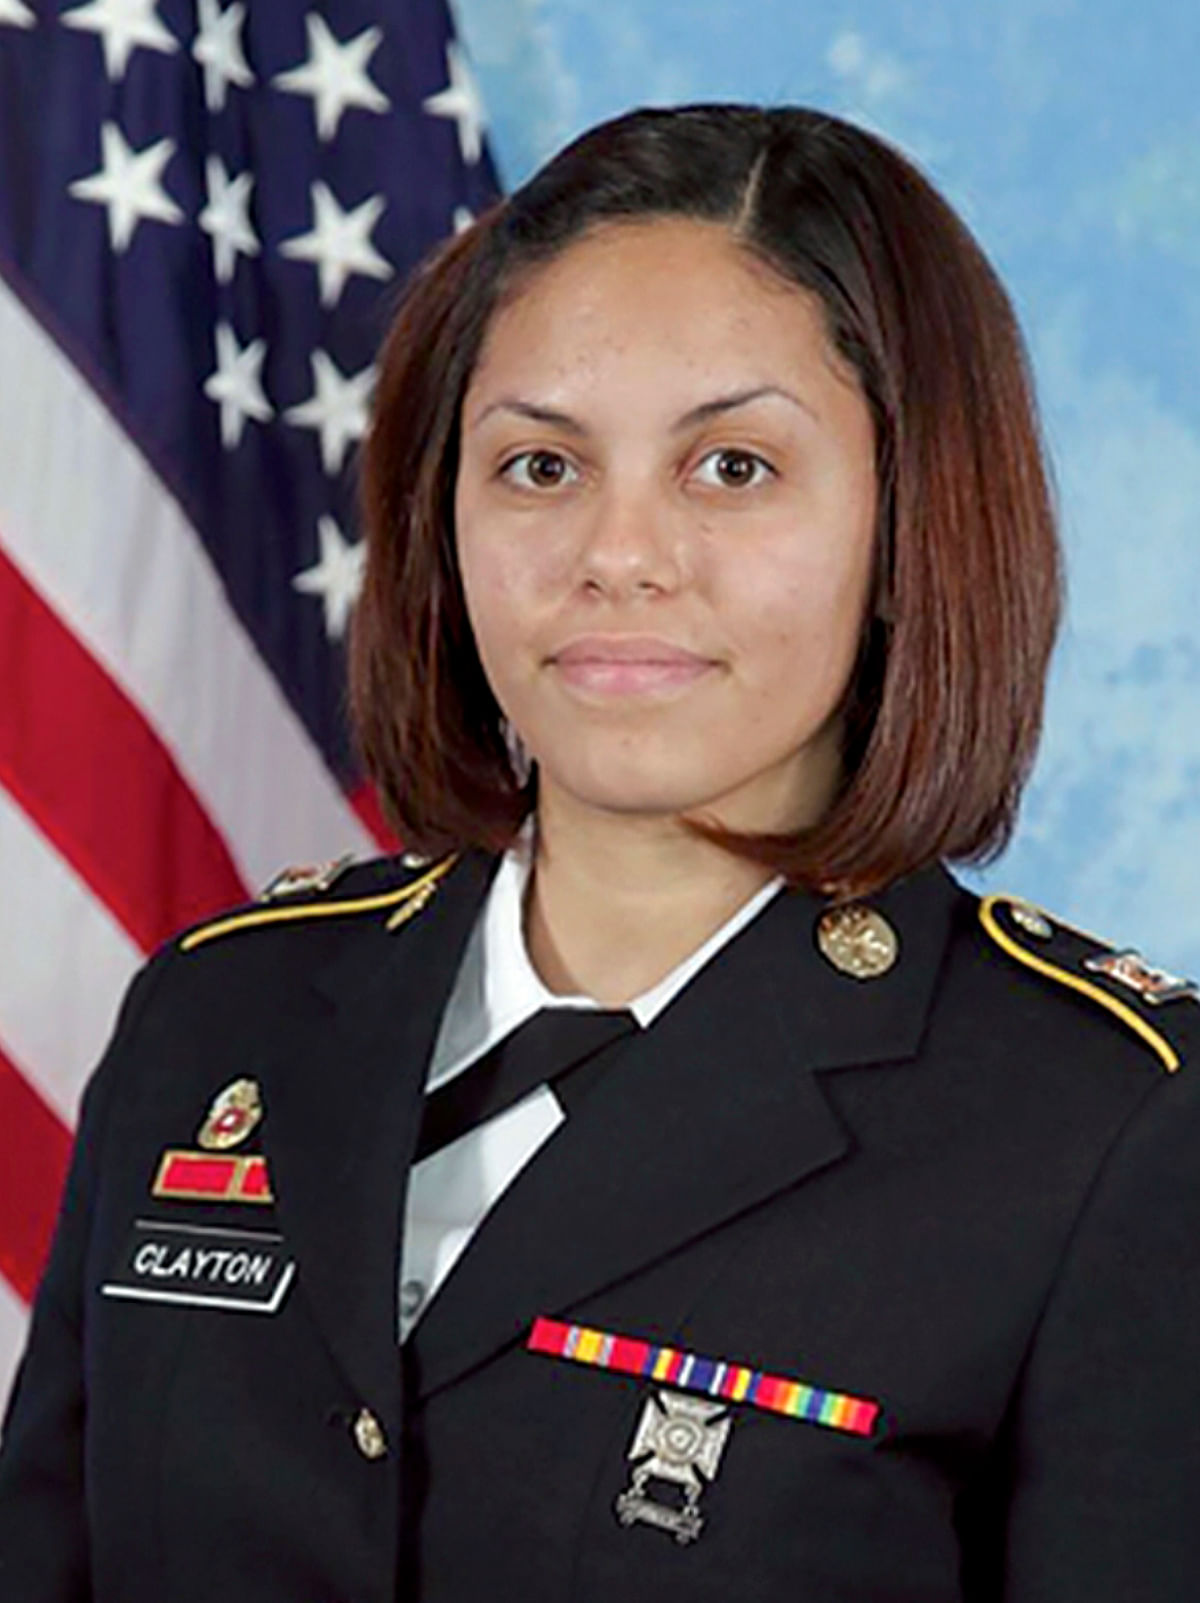 The US Army has published the final photo of a combat photographer who captured on camera the blast that killed her.